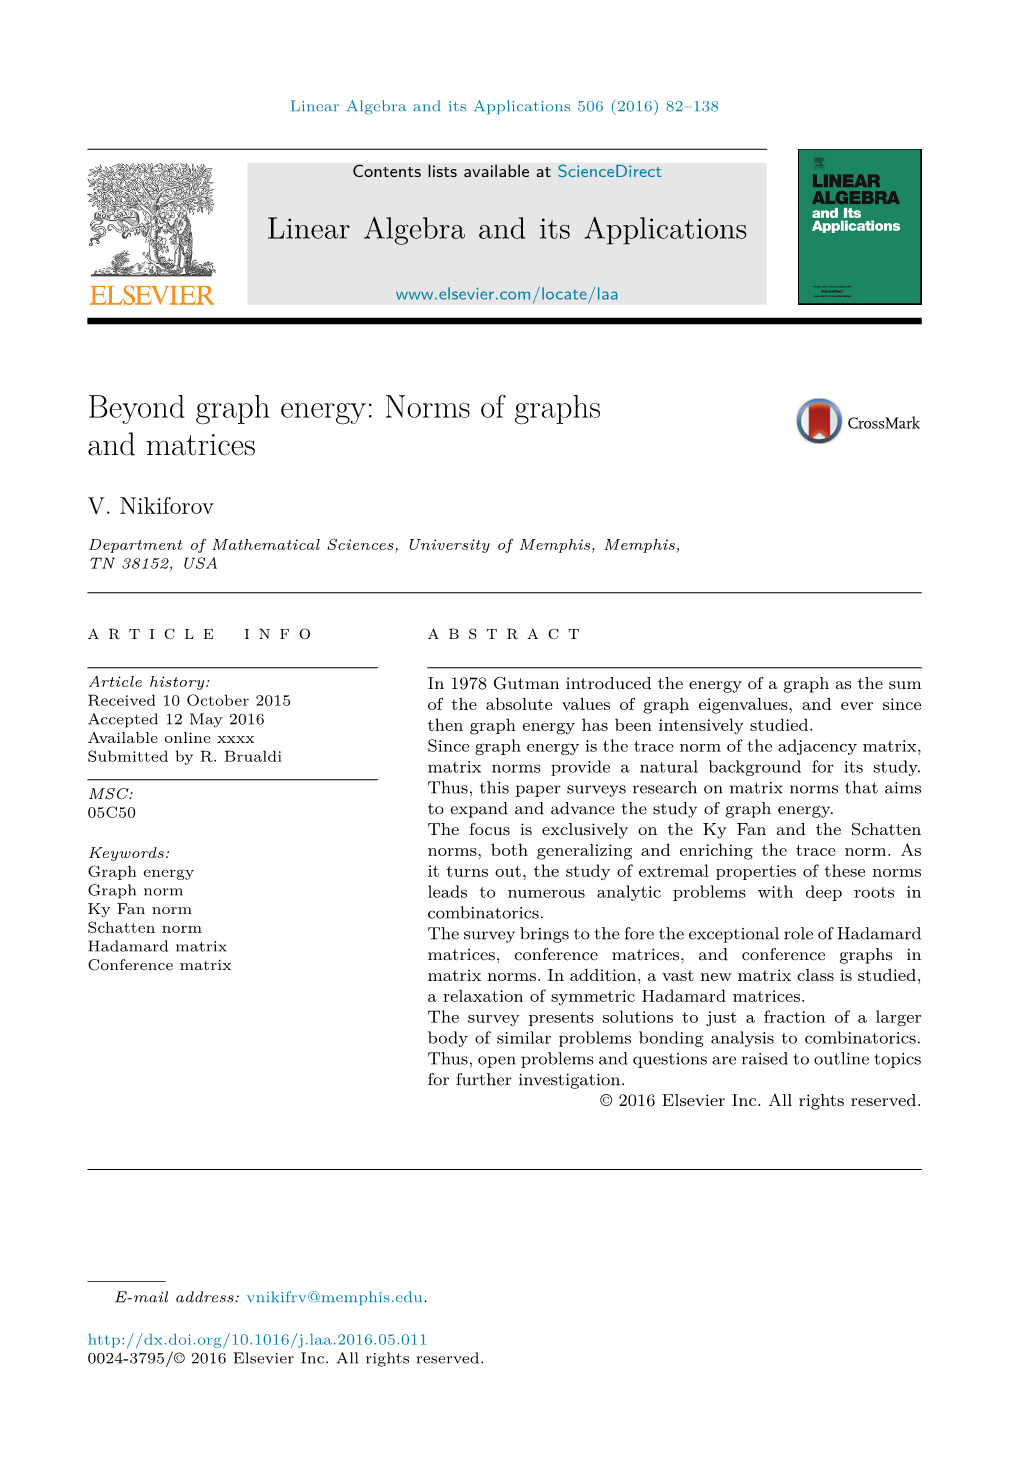 Beyond Graph Energy: Norms of Graphs and Matrices